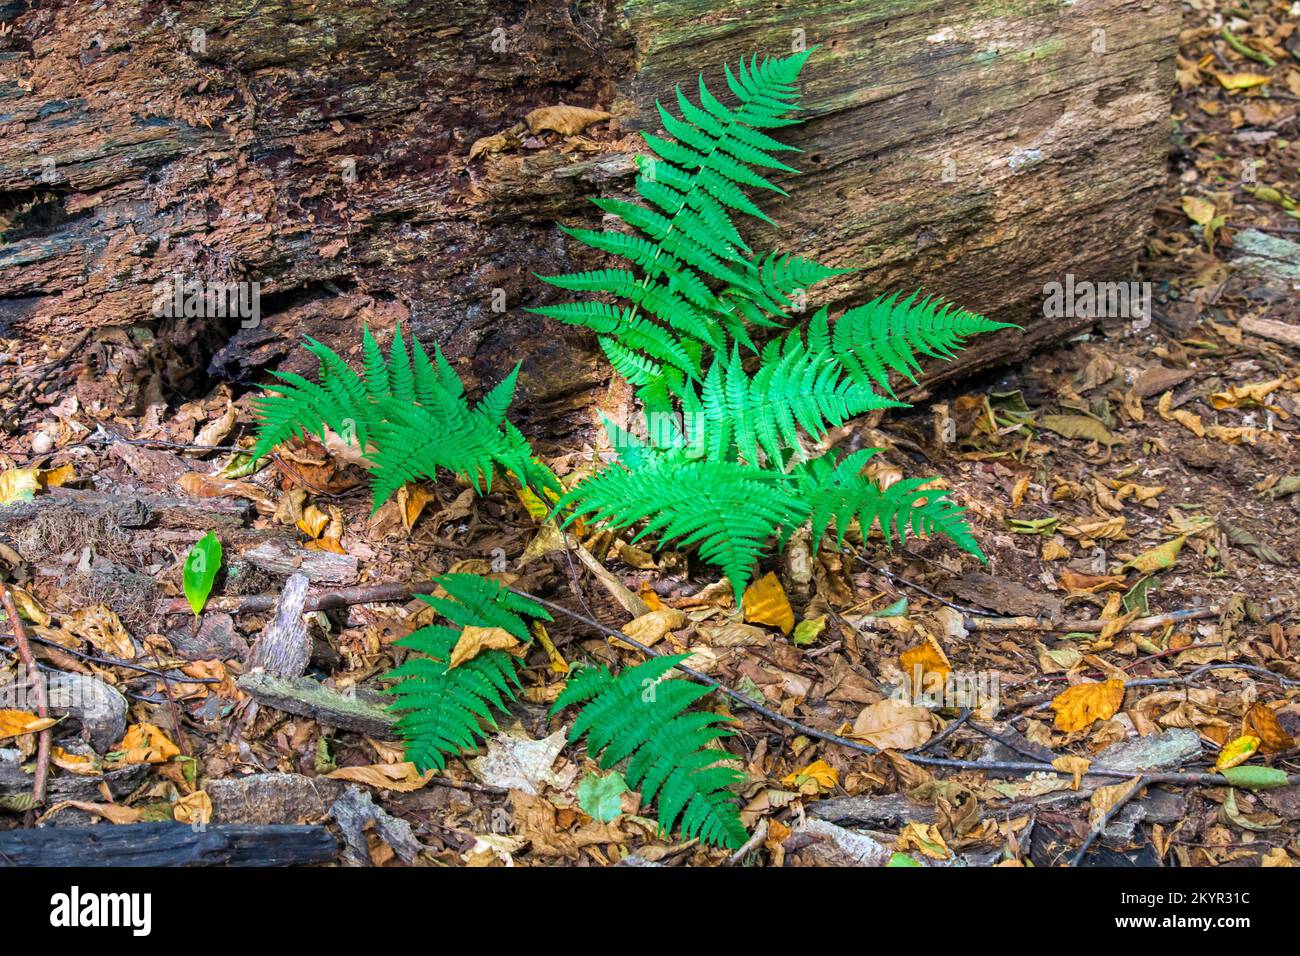 Lady Fern growing in a nortthern hardwood forest in Pennsylvania's Pocono Mountains Stock Photo